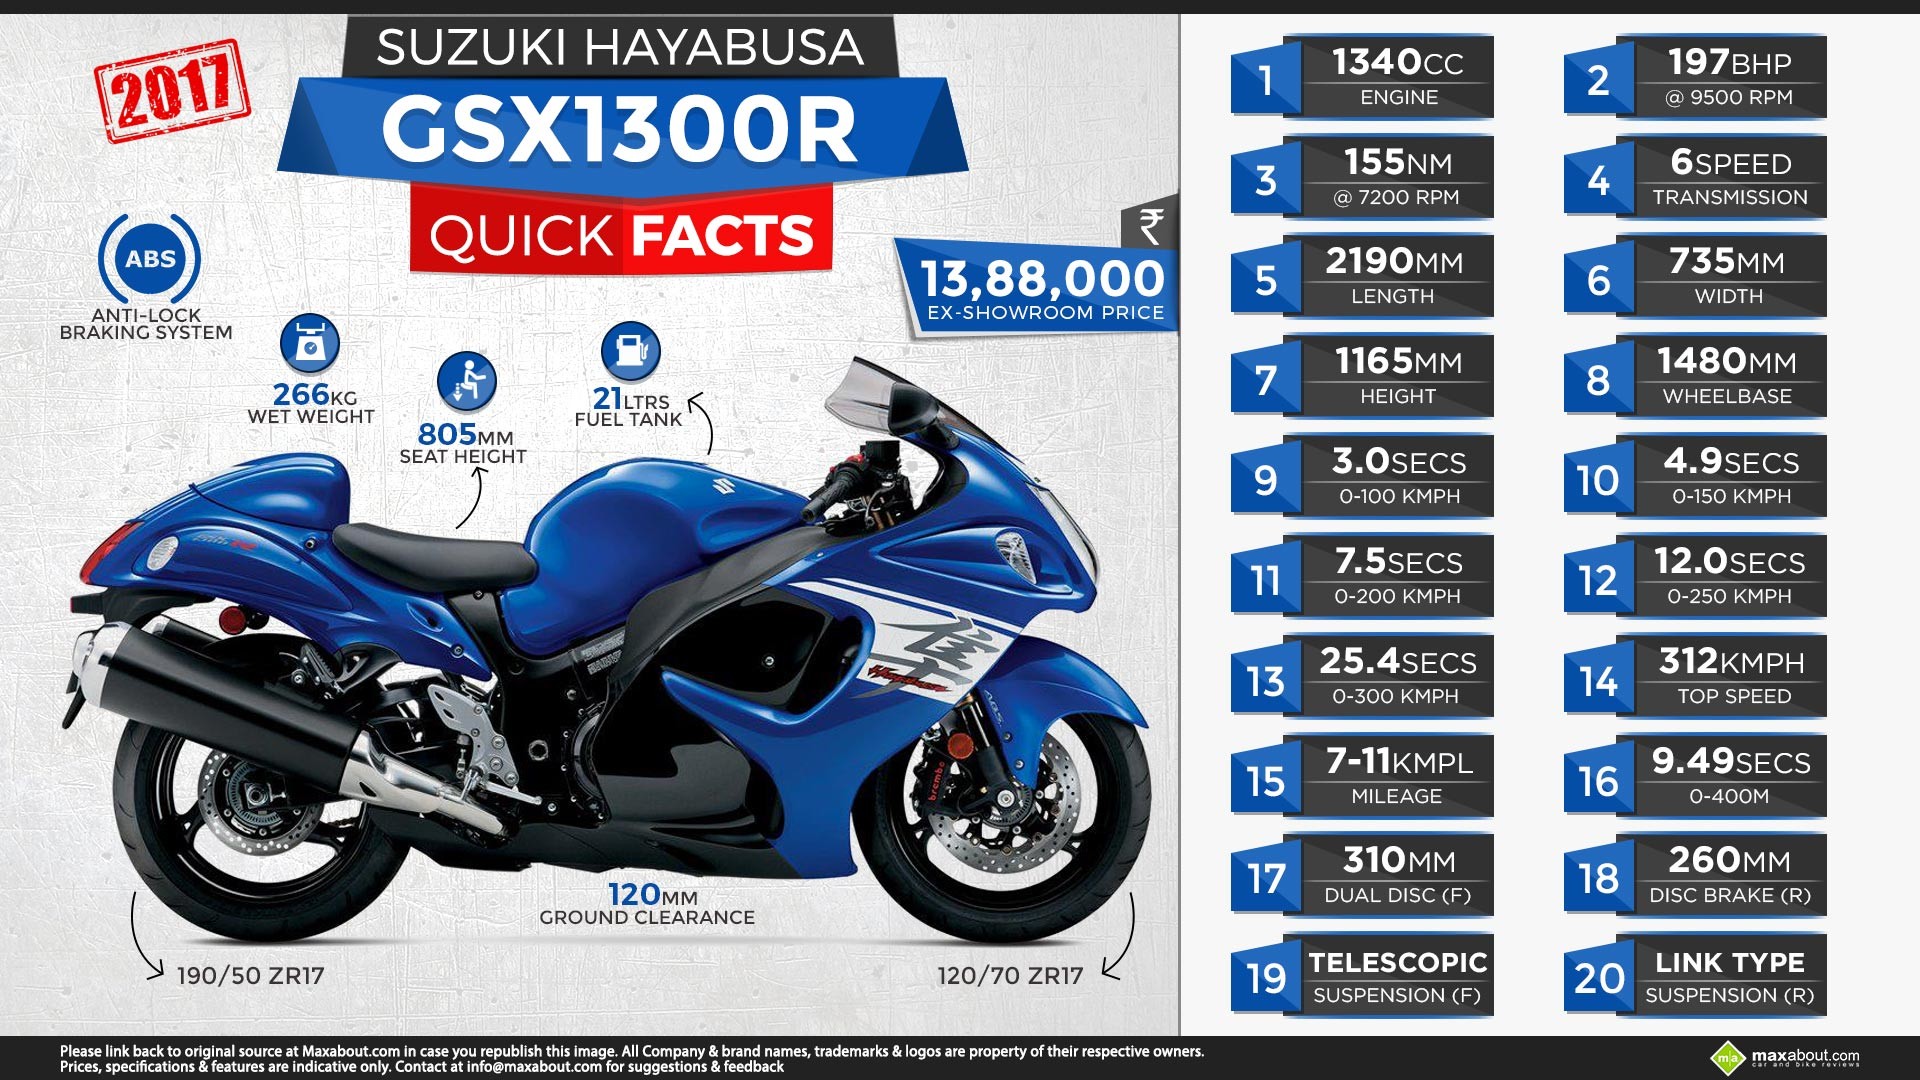 1920x1080 View Full Size. Quick Facts about the Suzuki Hayabusa GSX1300R